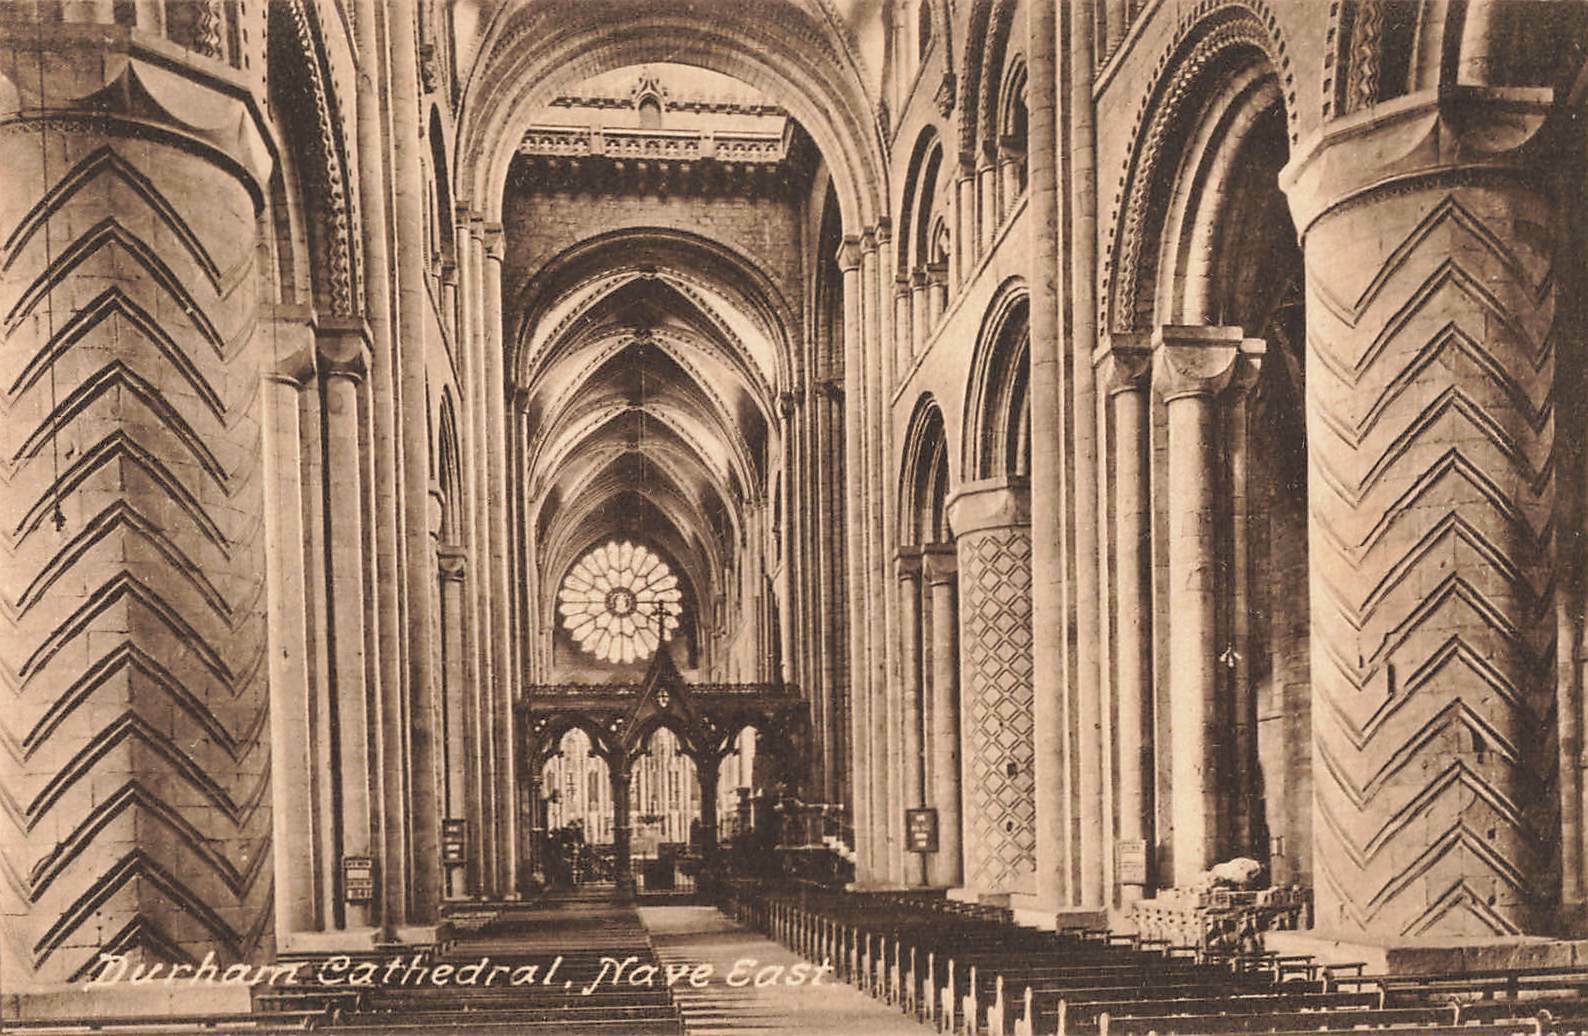 House Clearance - #72 Old Frith's service DURHAM CATHEDRAL Nave East No. 77667